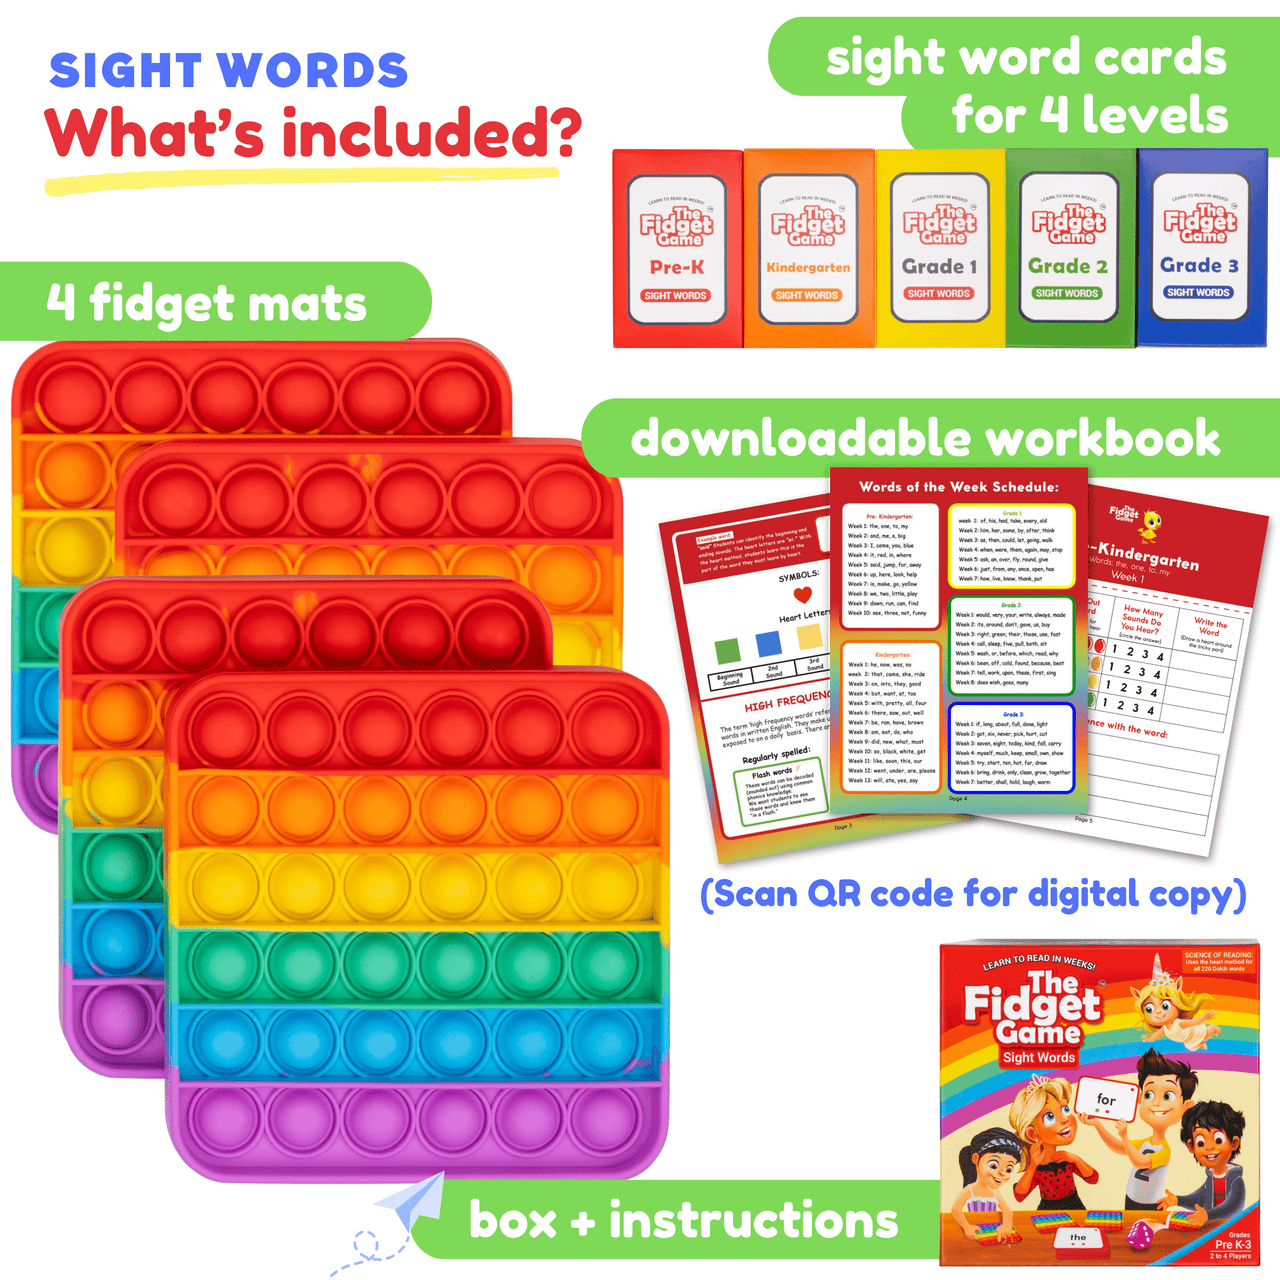 What Included in Sight Words